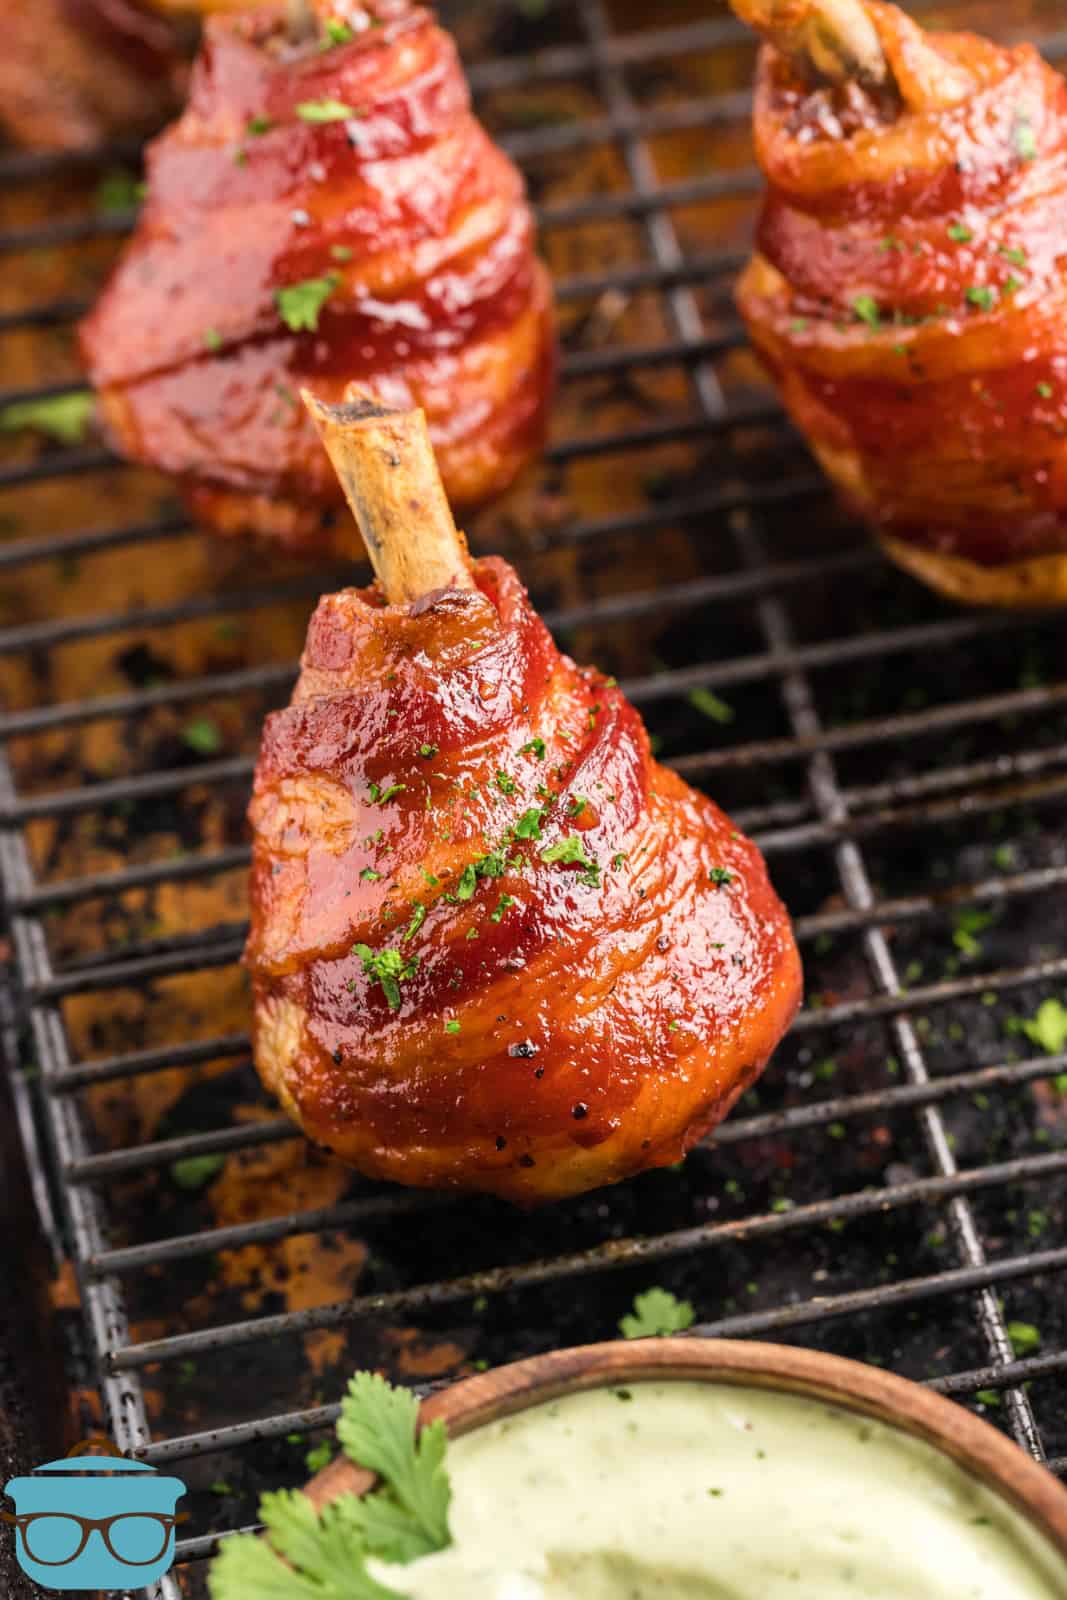 Finished Smoked Bacon Wrapped Chicken Lollipops on grill with dried cilantro.